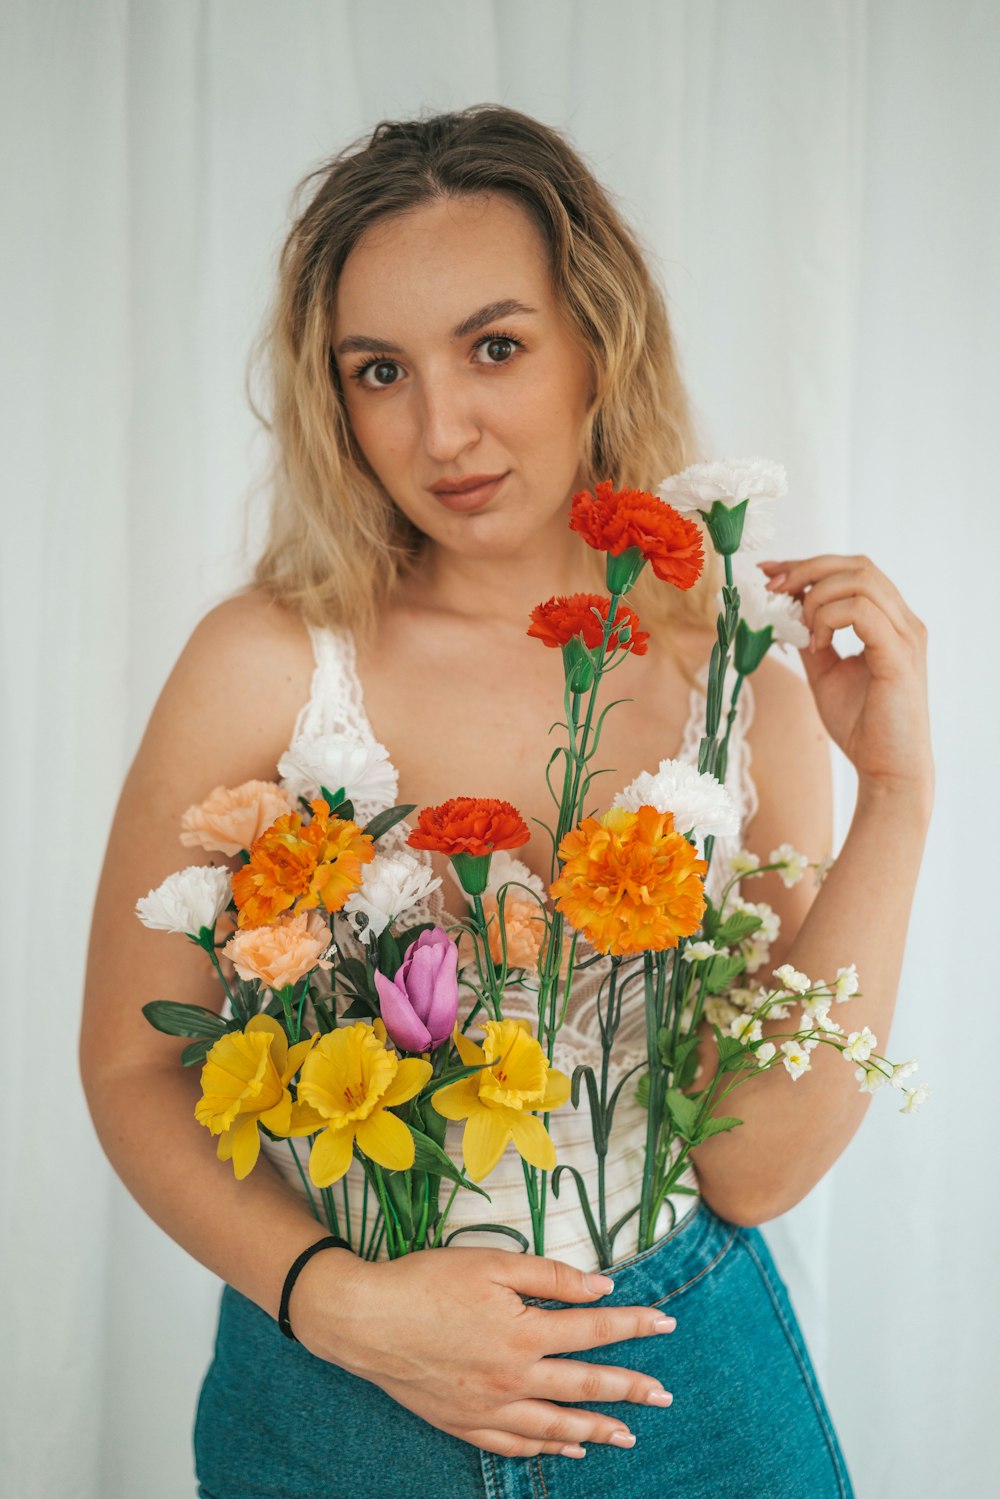 woman in white tank top holding orange and white flower bouquet